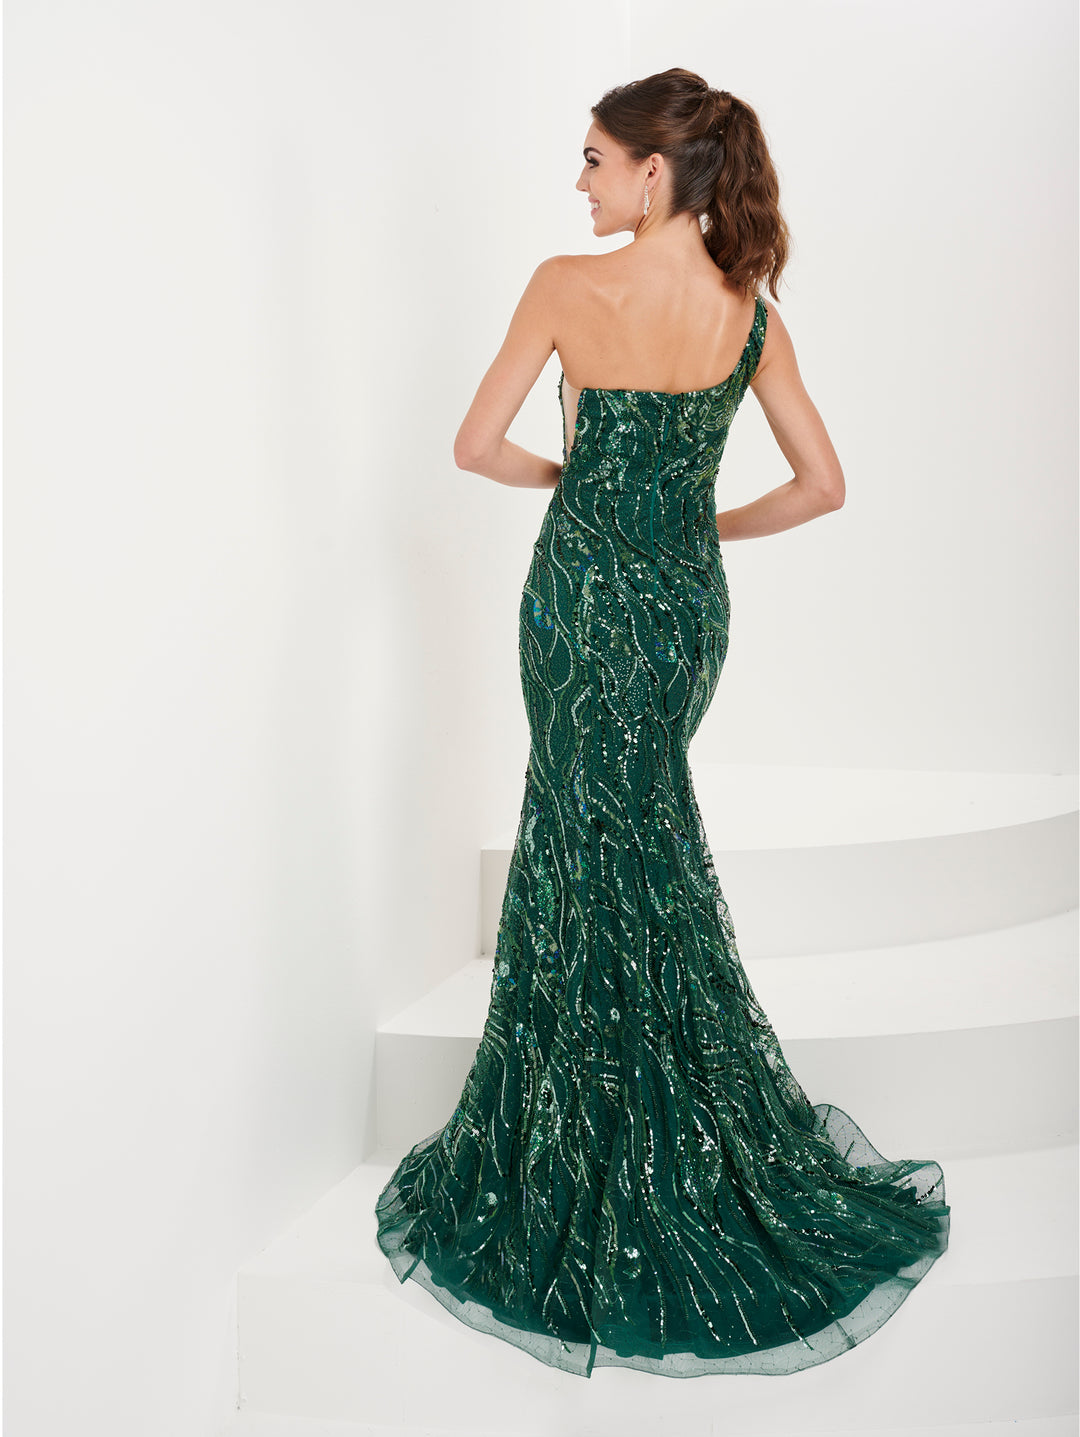 Fitted Embellished One Shoulder Gown by Panoply 14188